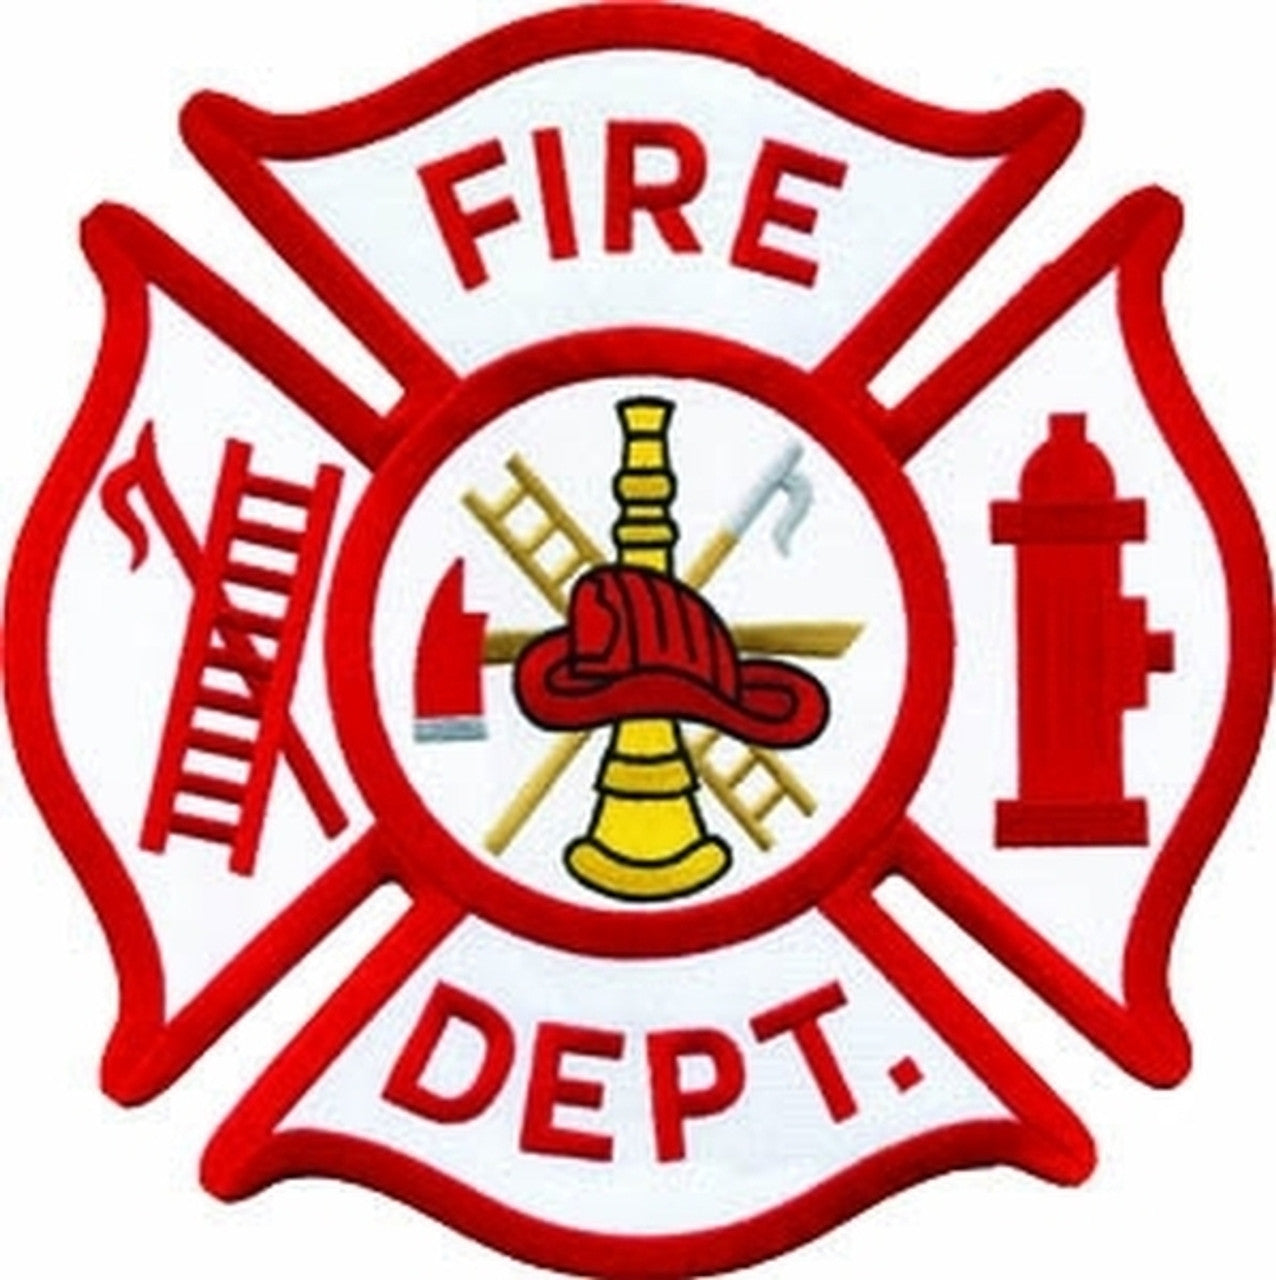 Fire Department Back Patch - 12 inch